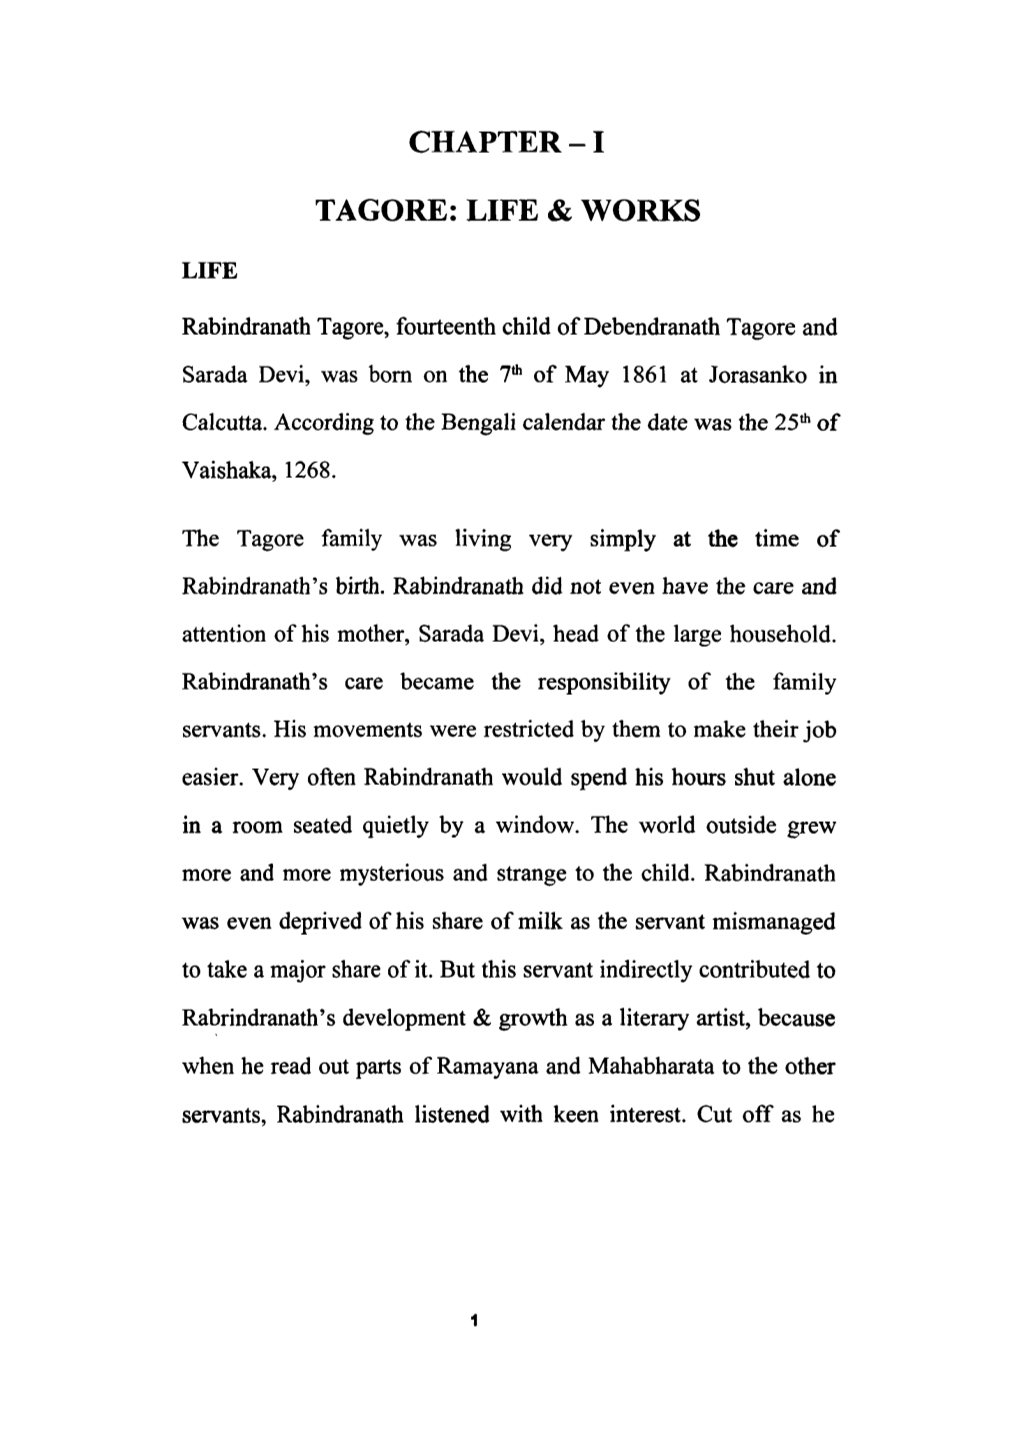 Chapter -1 Tagore: Life & Works